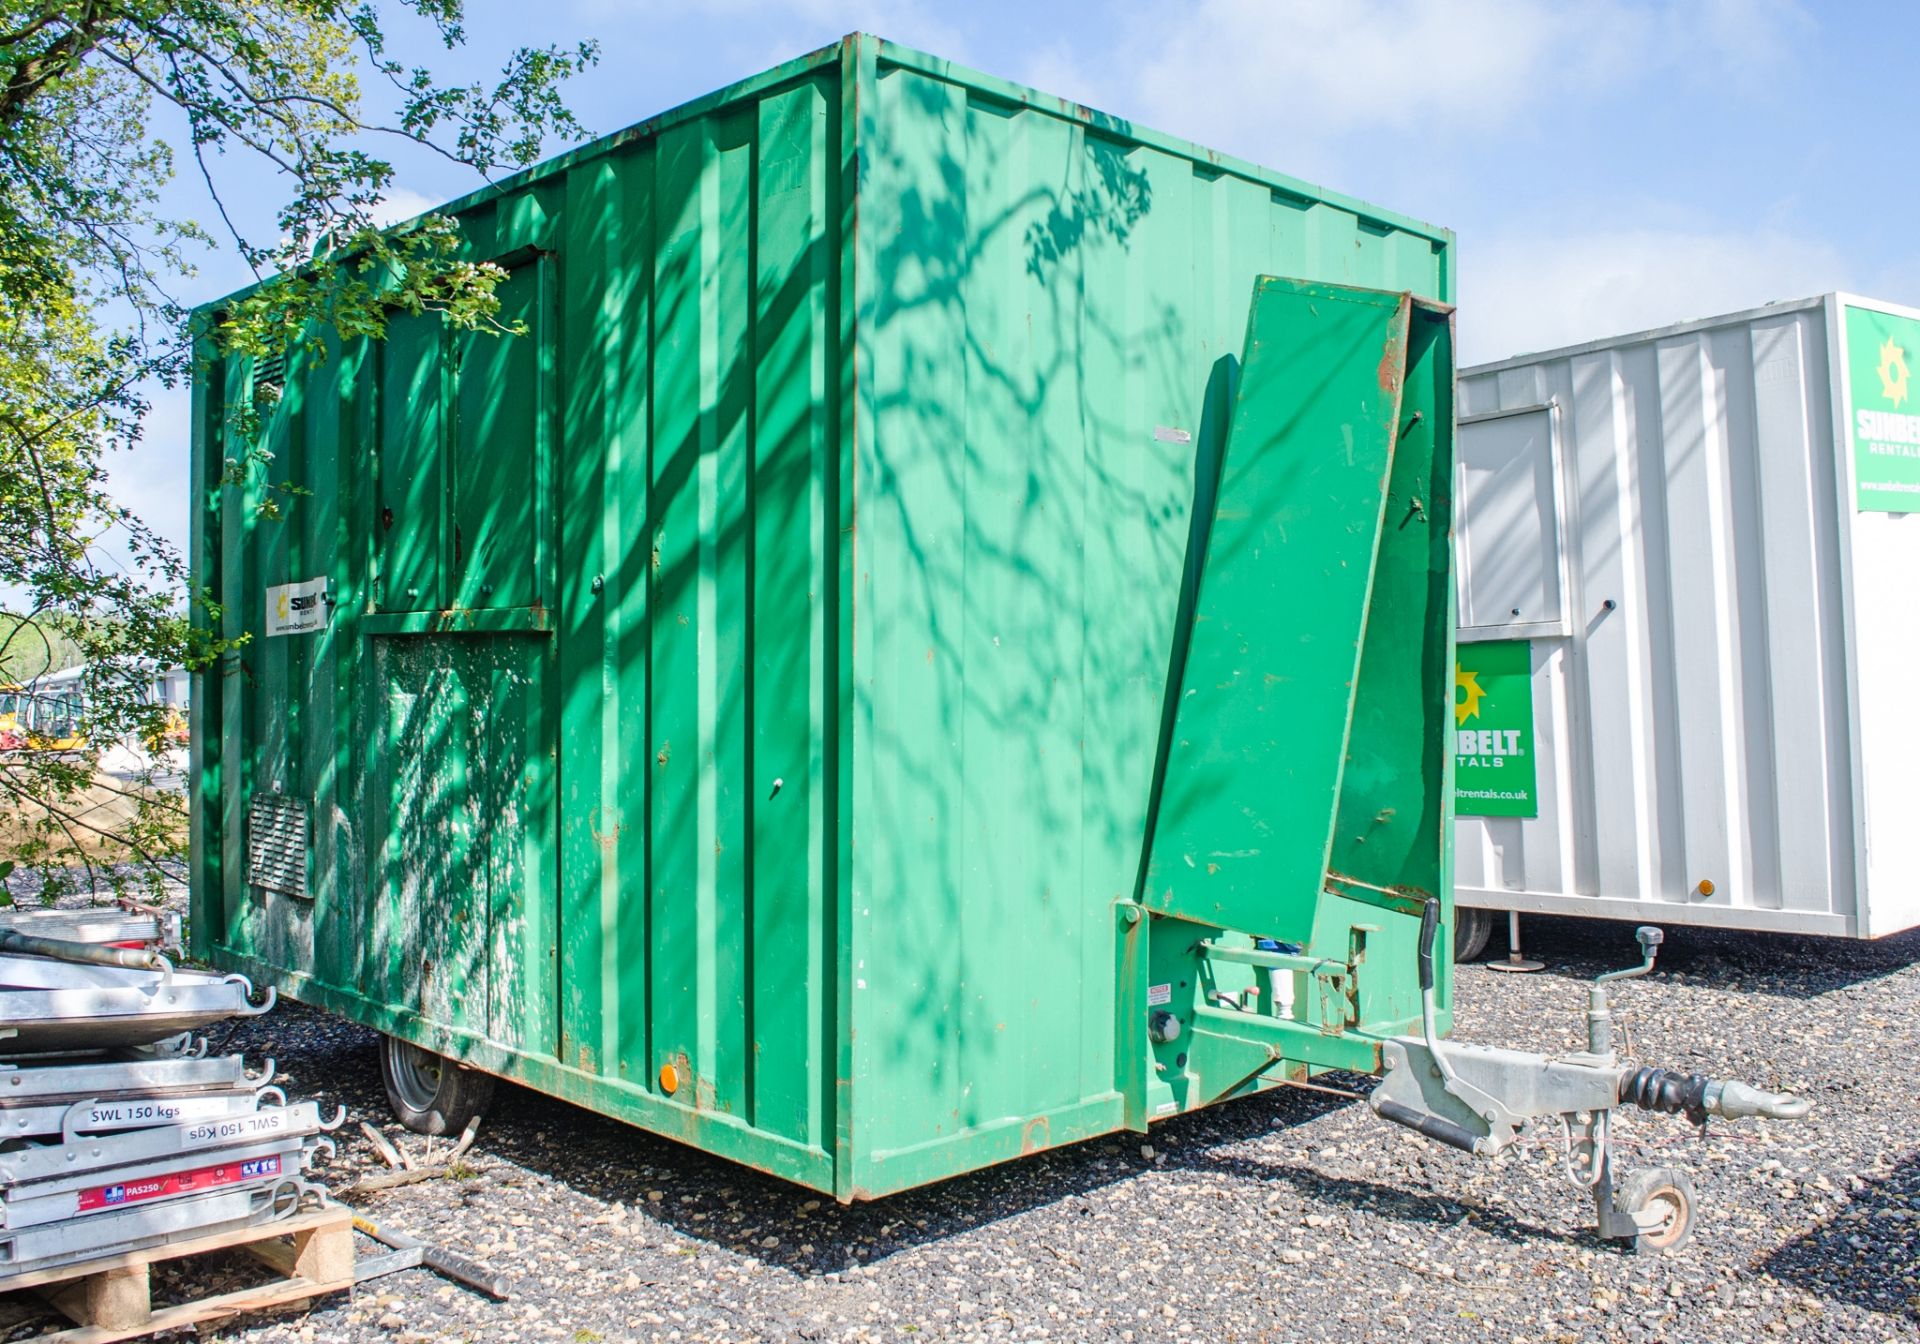 Groundhog 12 ft x 8 ft mobile welfare unit Comprising of: canteen area, toilet & generator room - Image 3 of 11